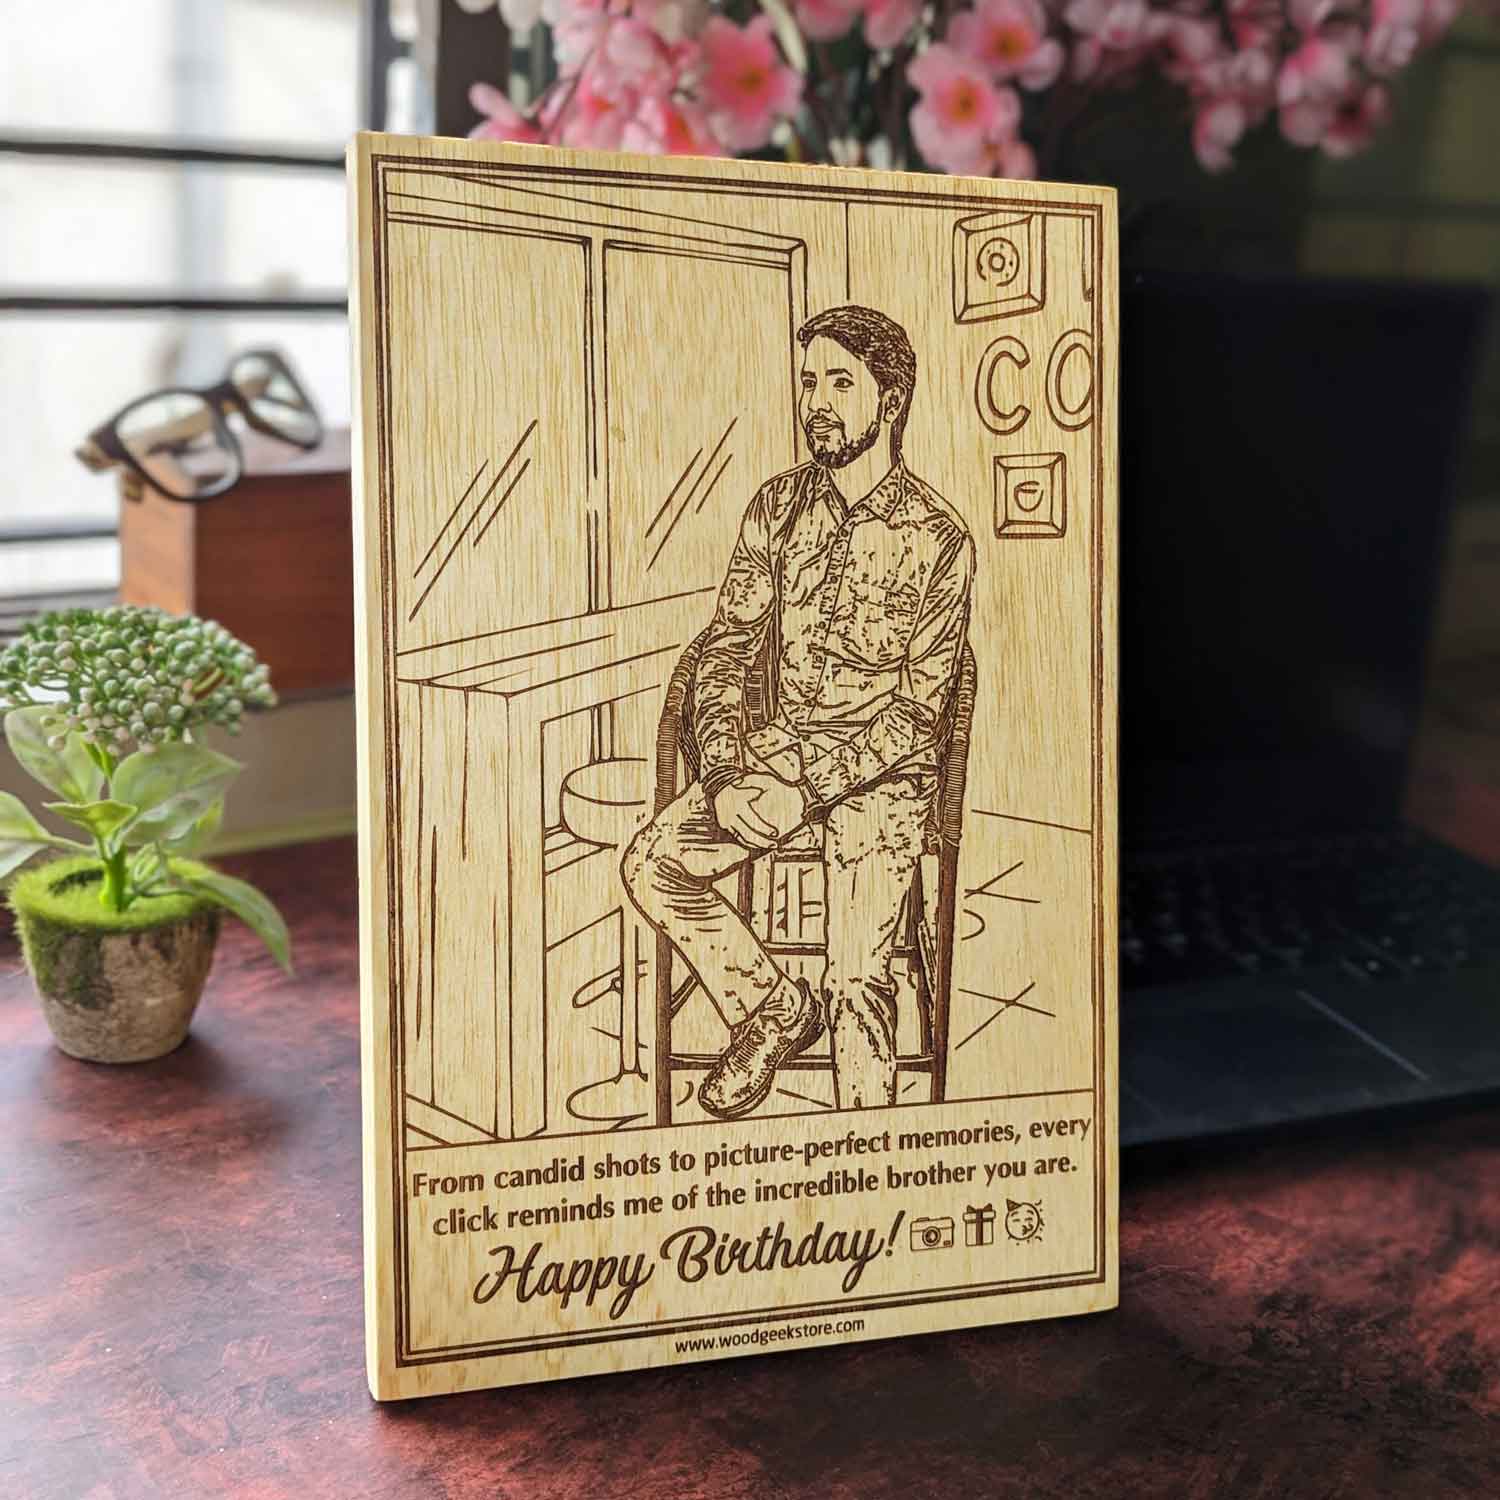 Engraved wood frame personalized with photo and birthday greeting